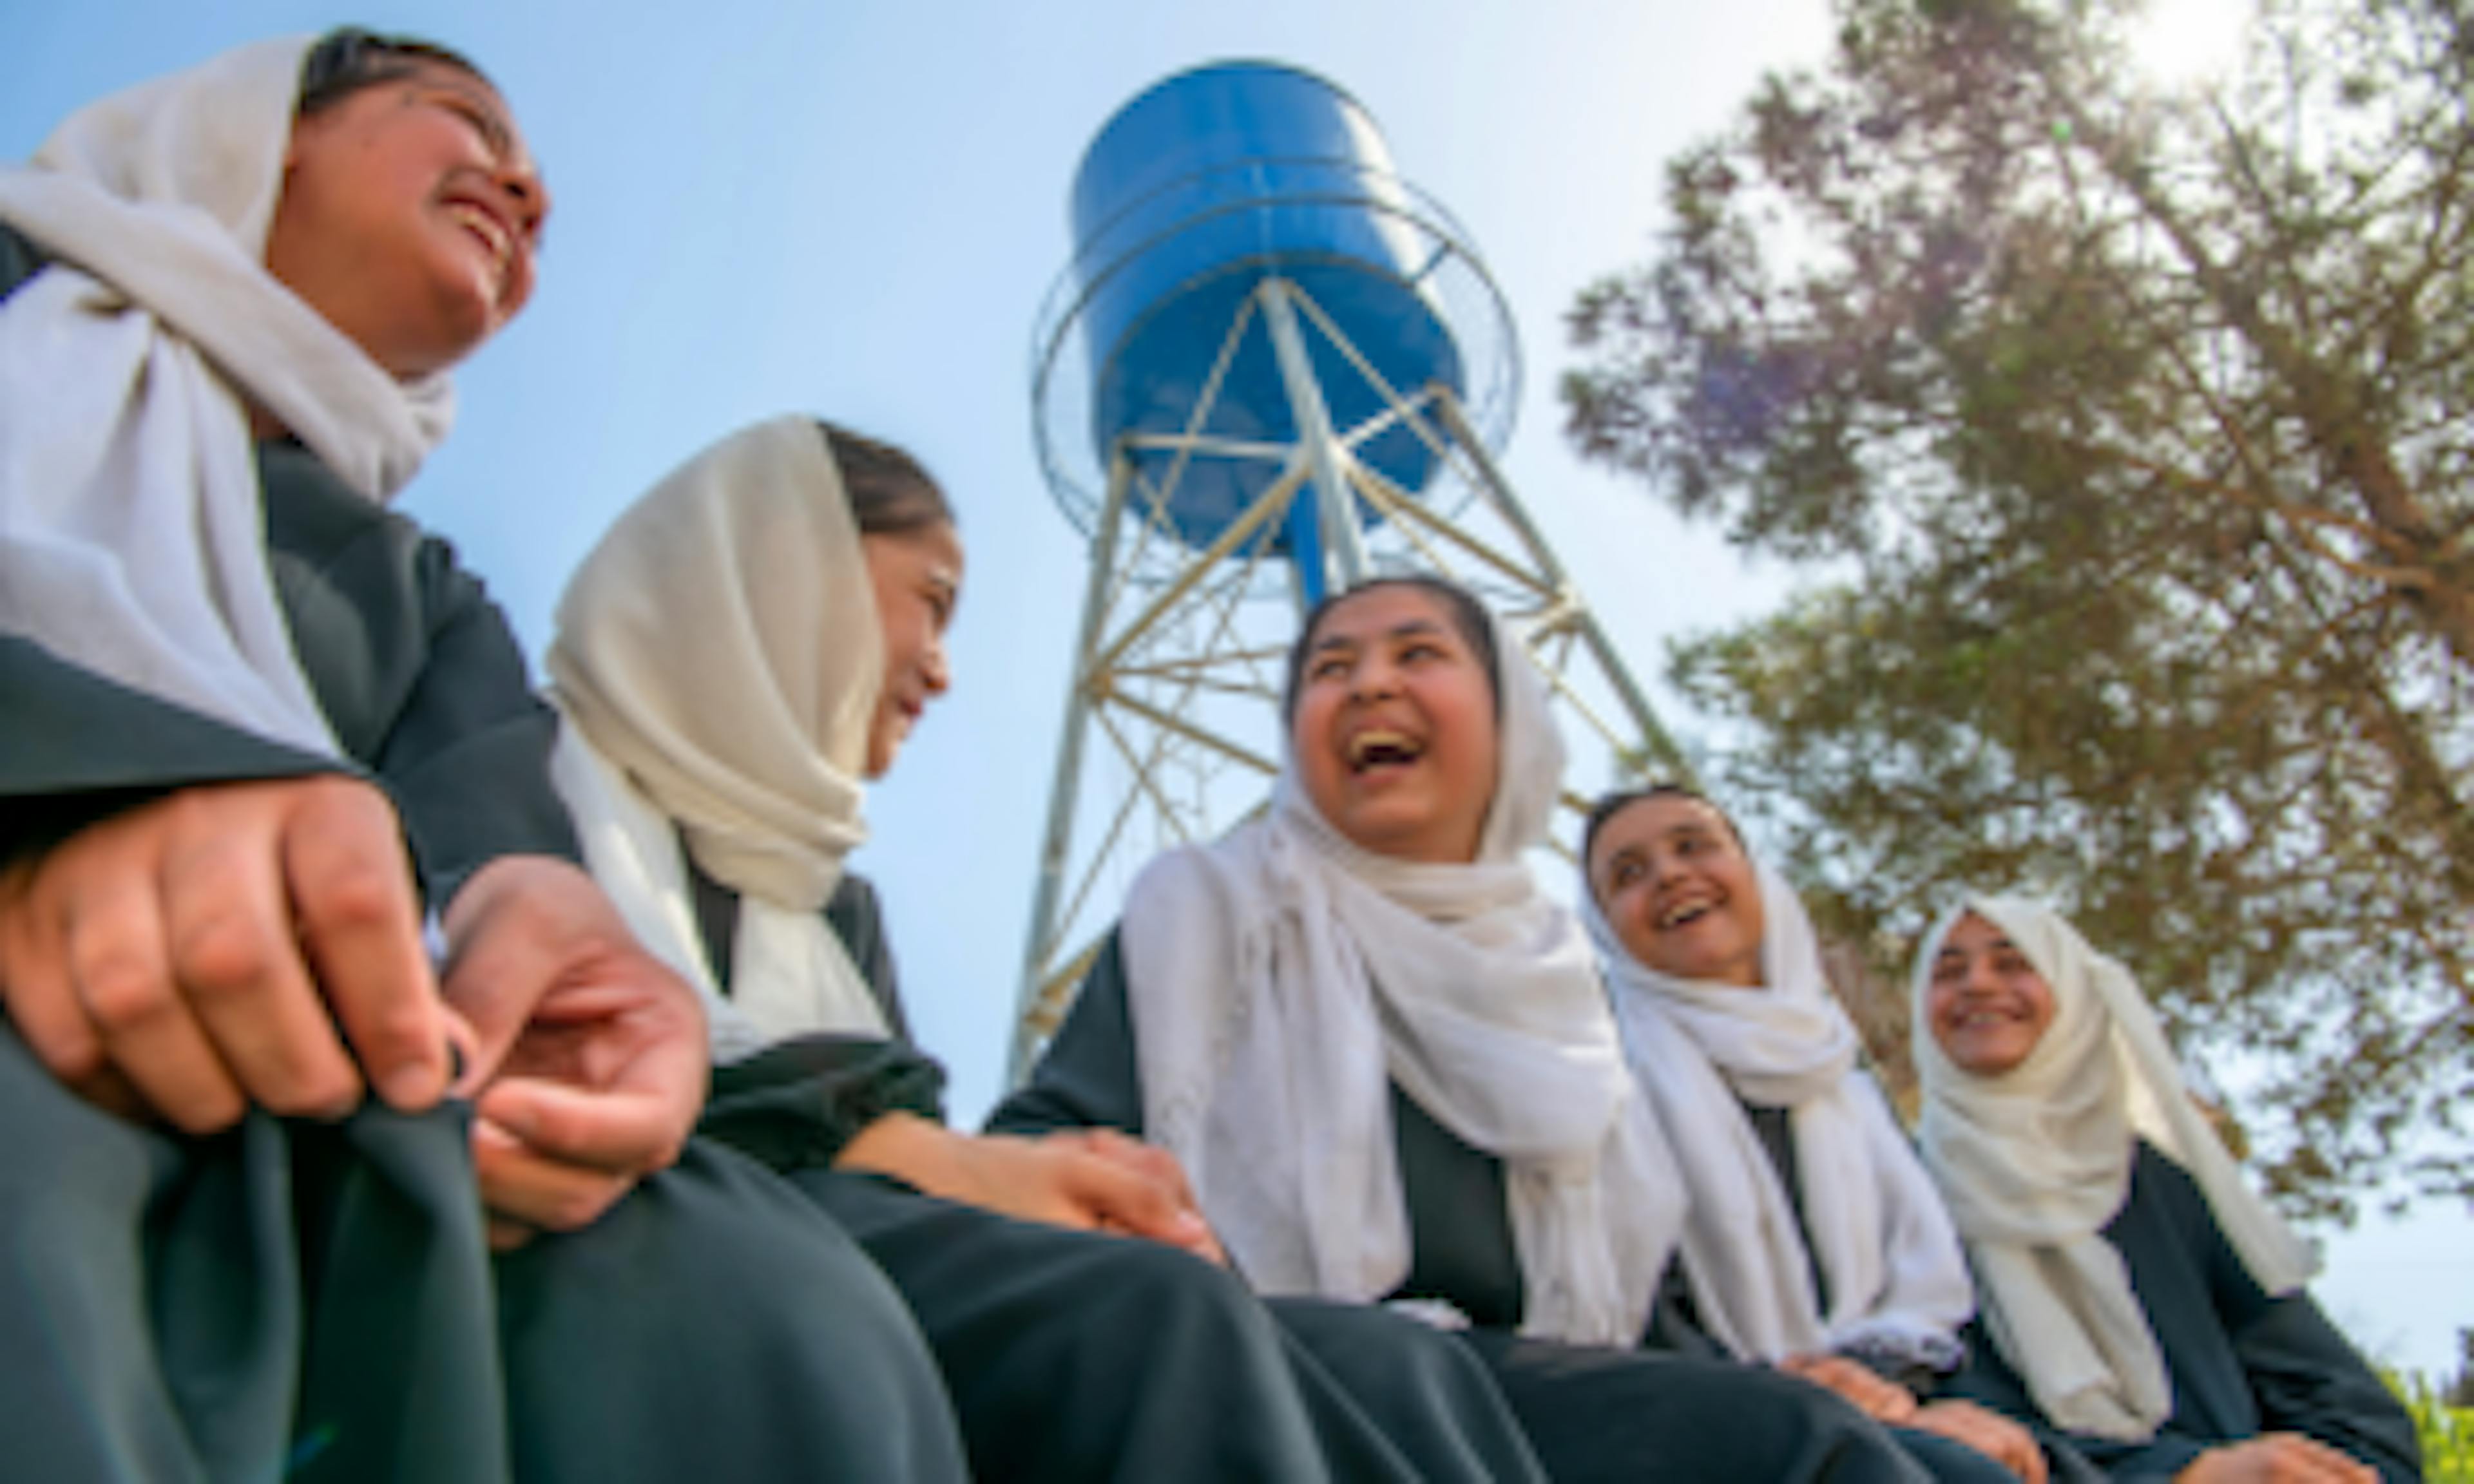 A group of students talk and laugh near the UNICEF-installed water tank.